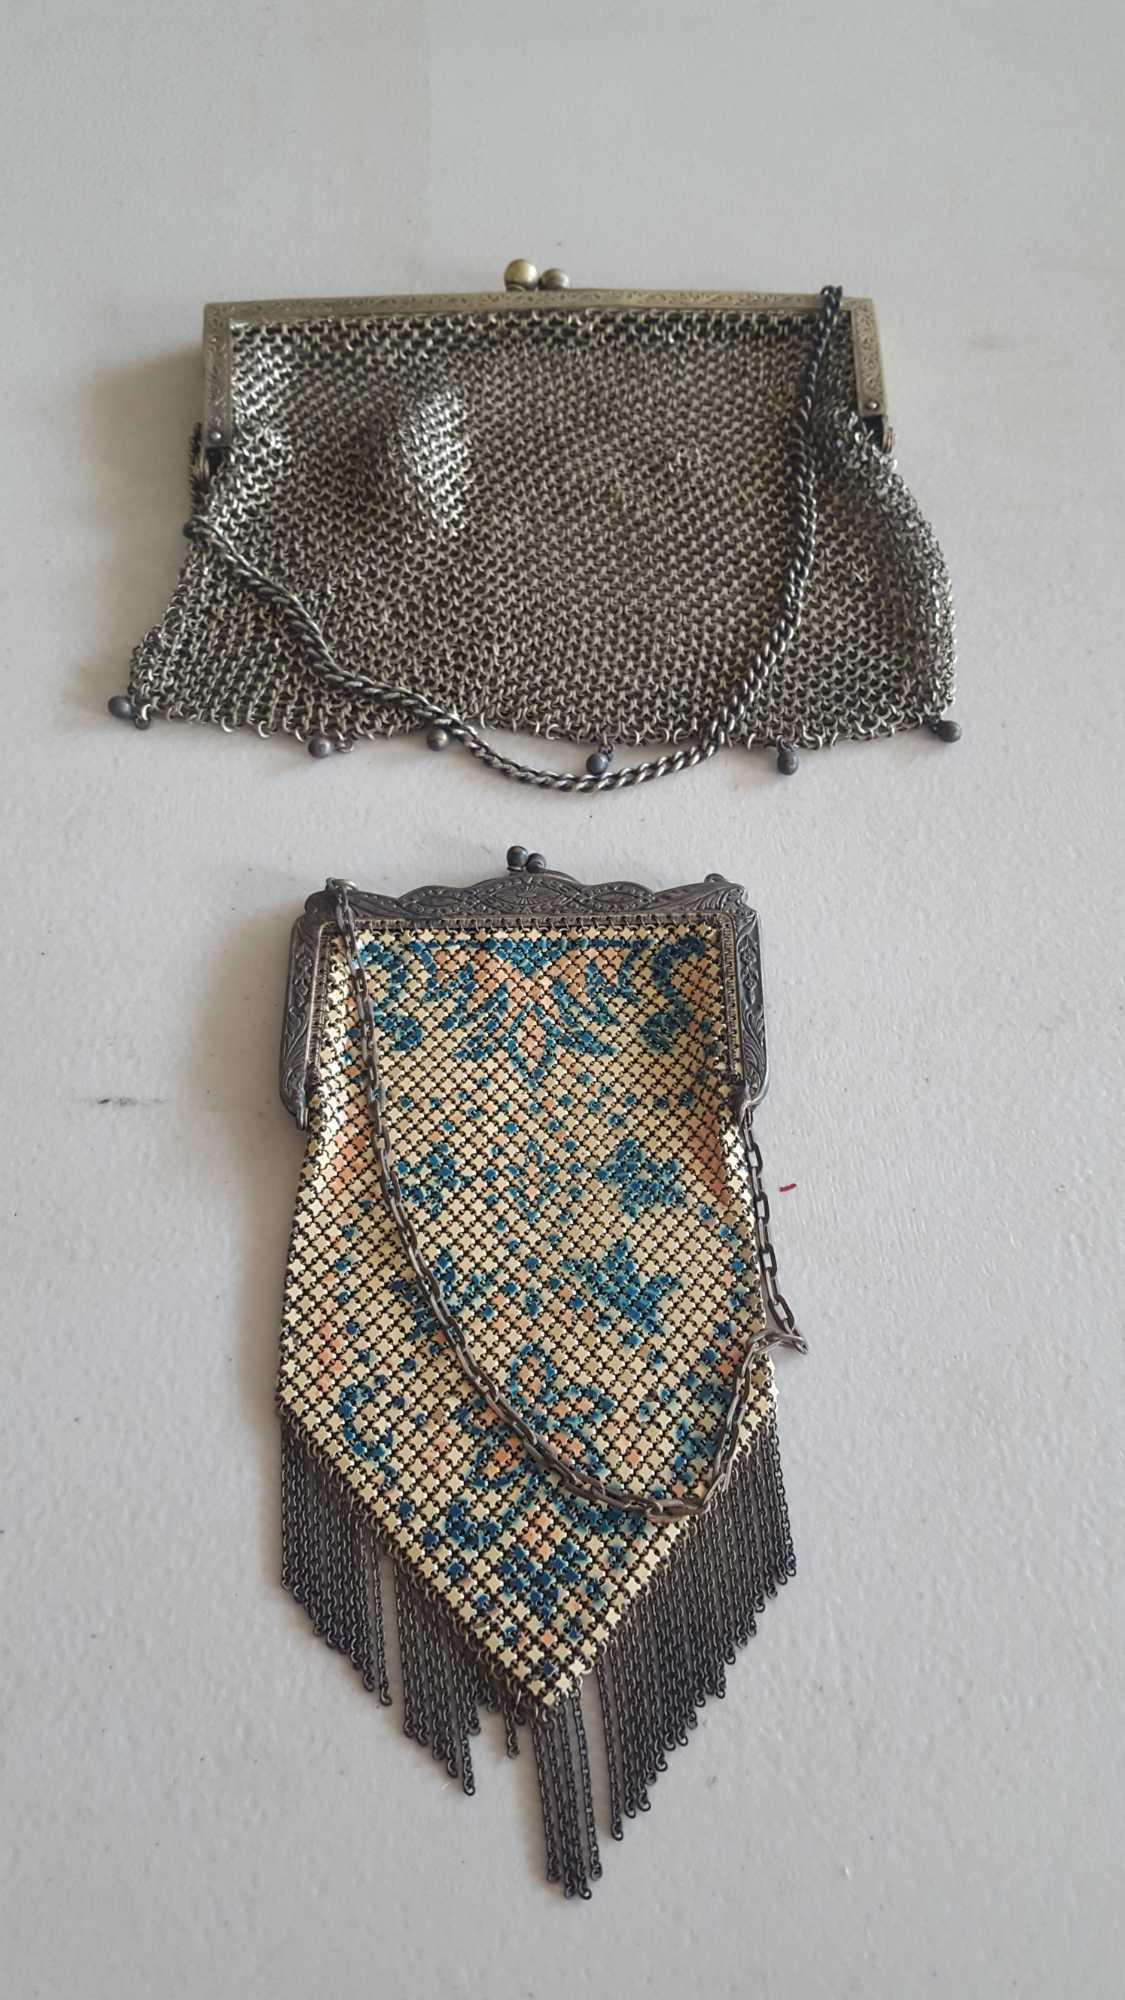 Chainmail purses - 1 is german silver, other mandalia mfg co